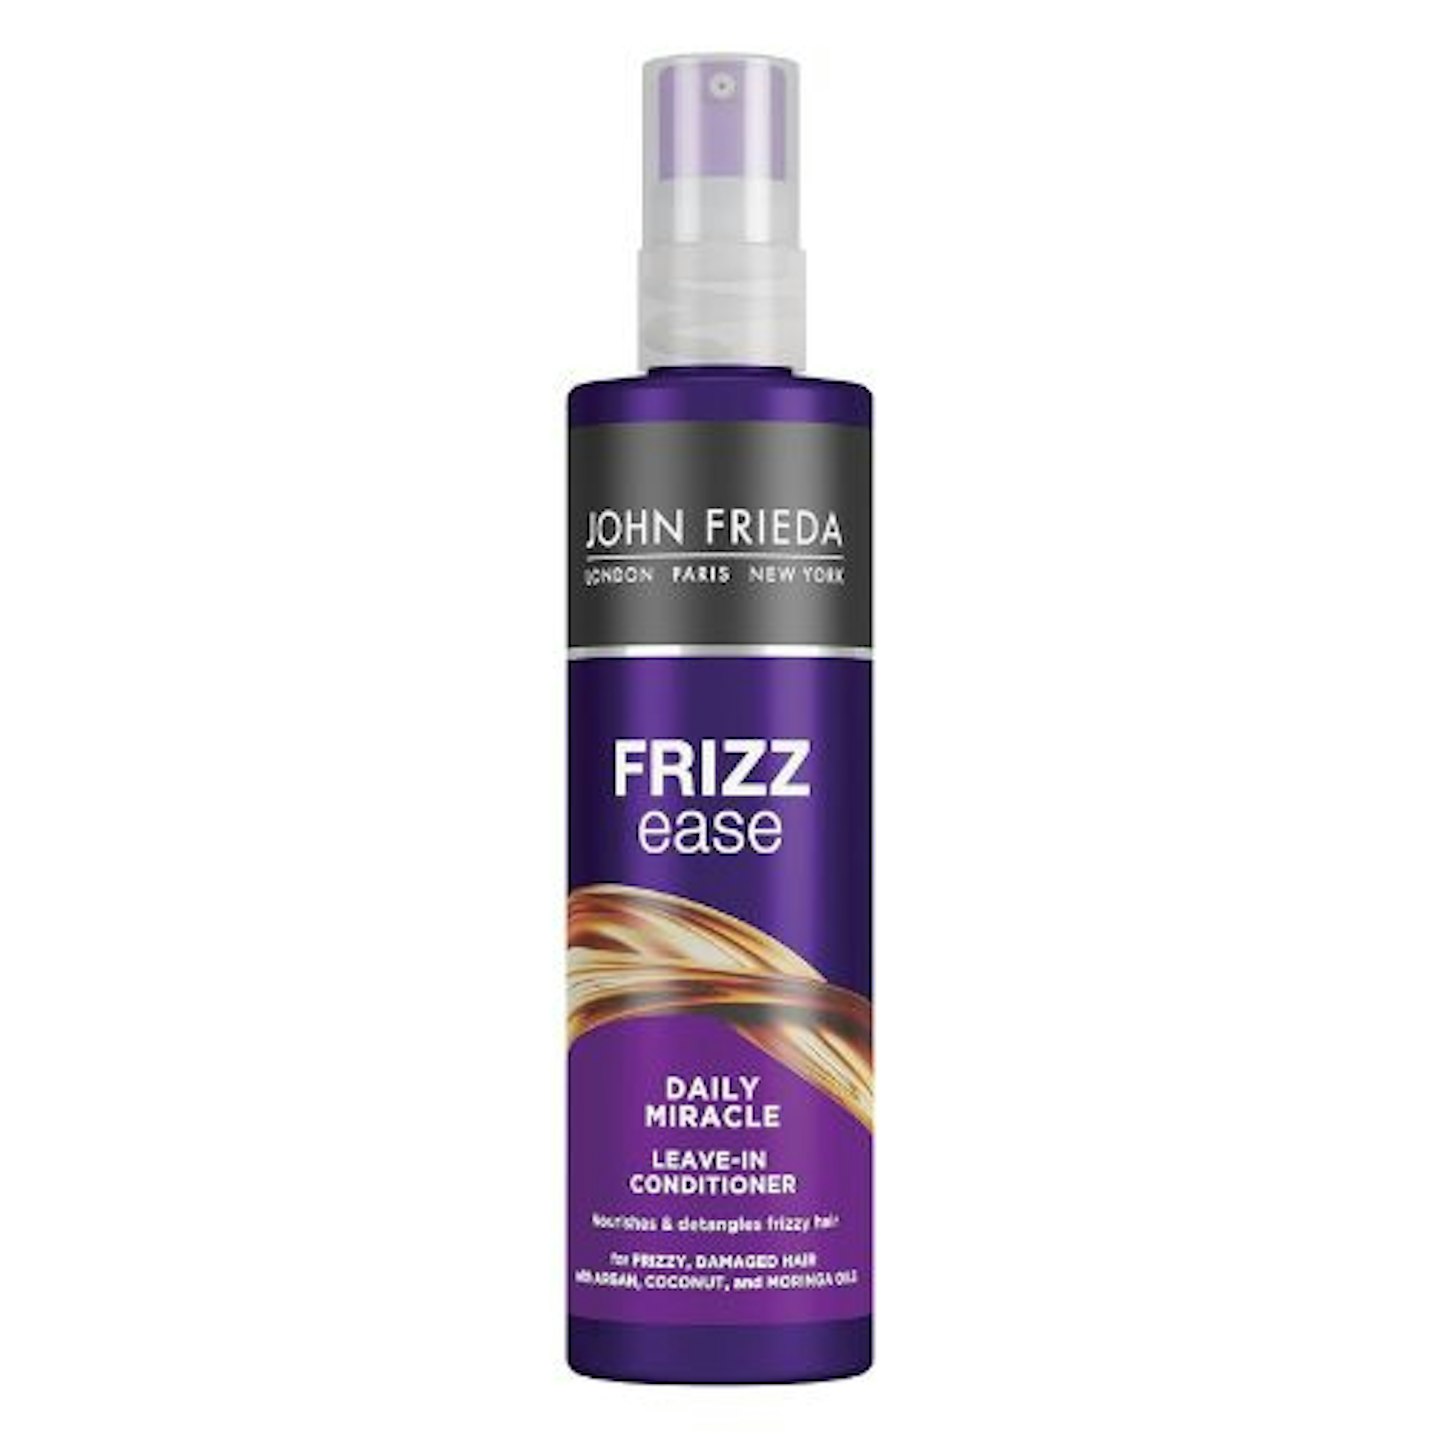 John Frieda Frizz Ease Daily Miracle Leave In Conditioner